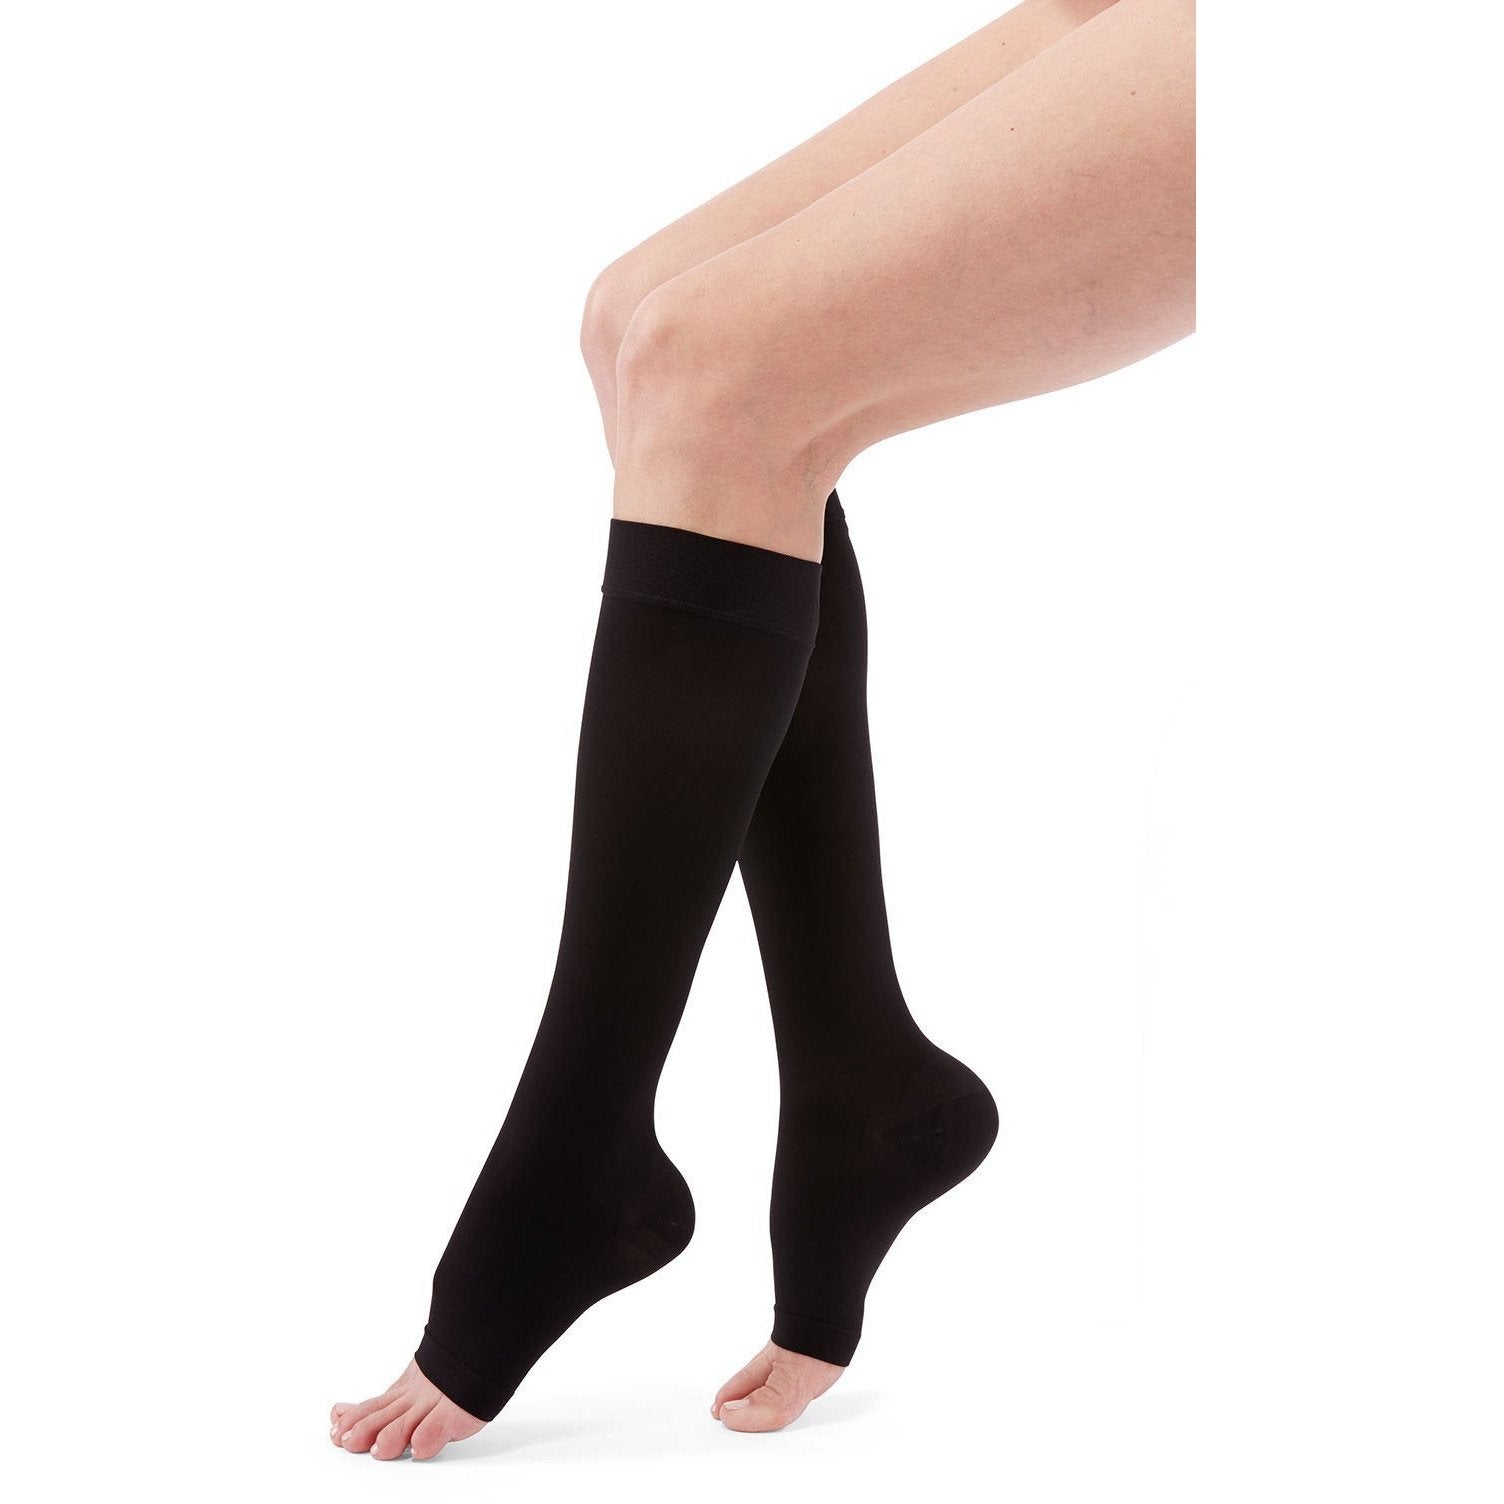 Duomed Soft Compression Stockings - Standard Sand Calf - Phelan's